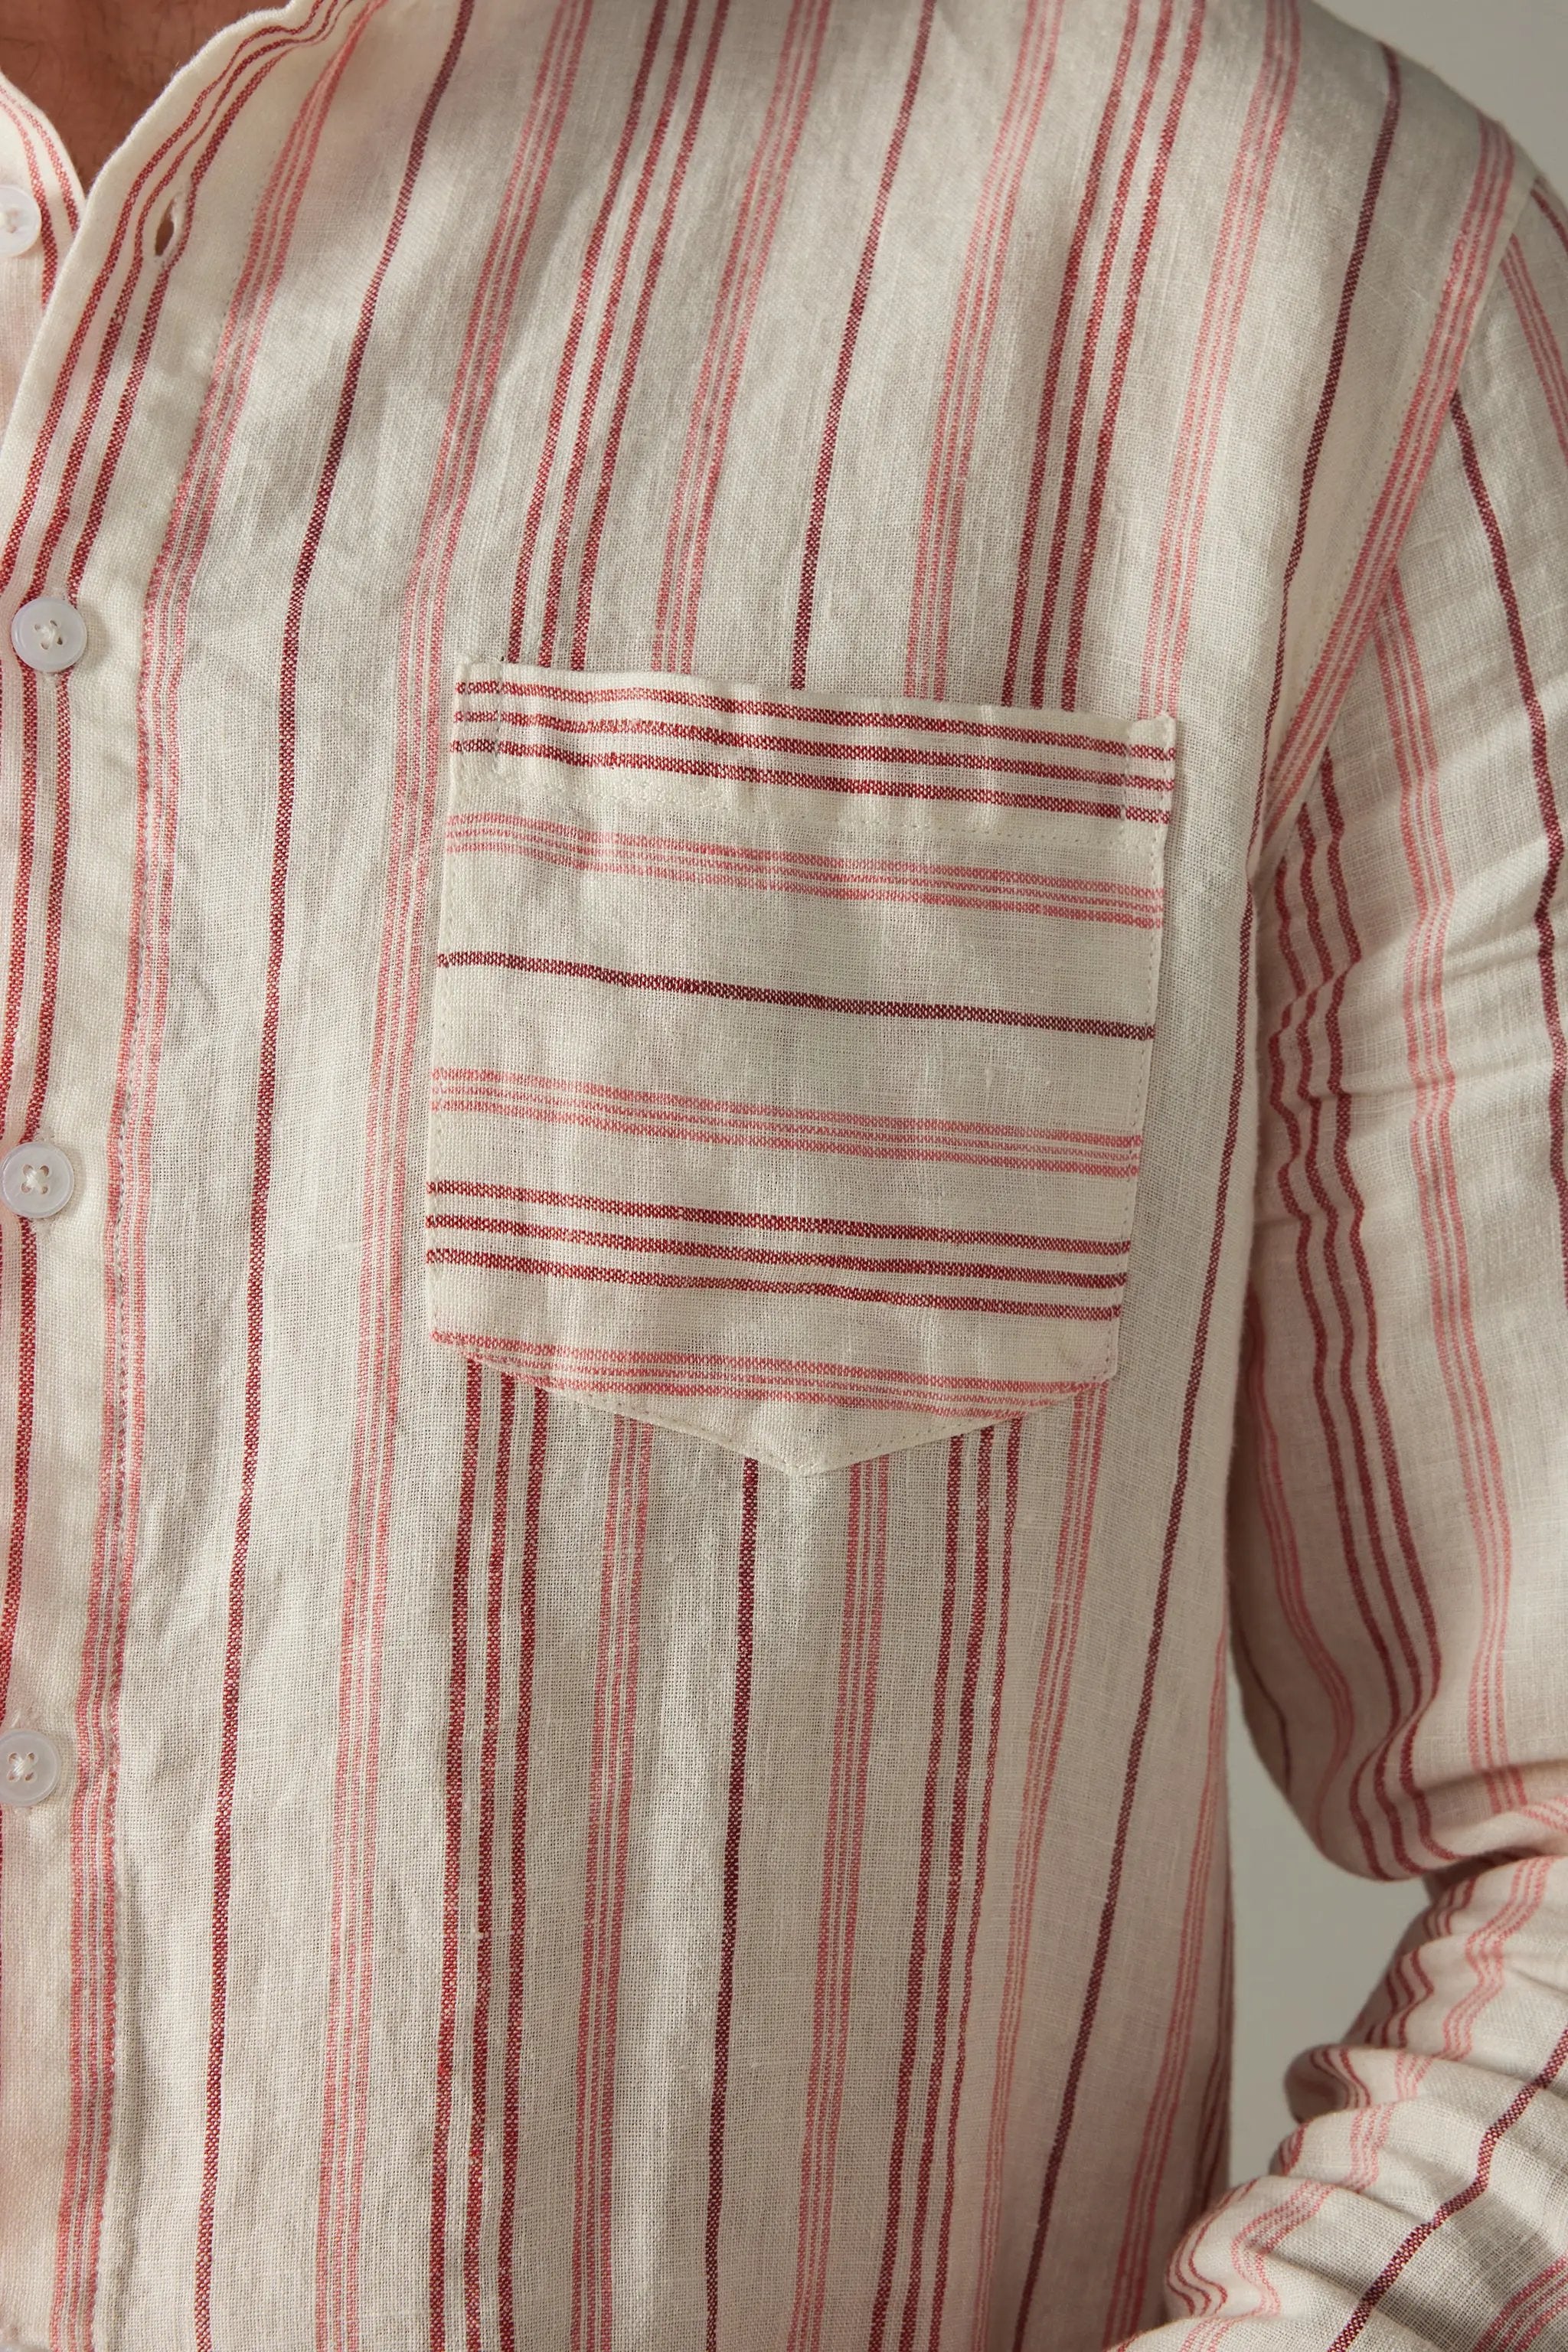 a man wearing a red and white striped shirt